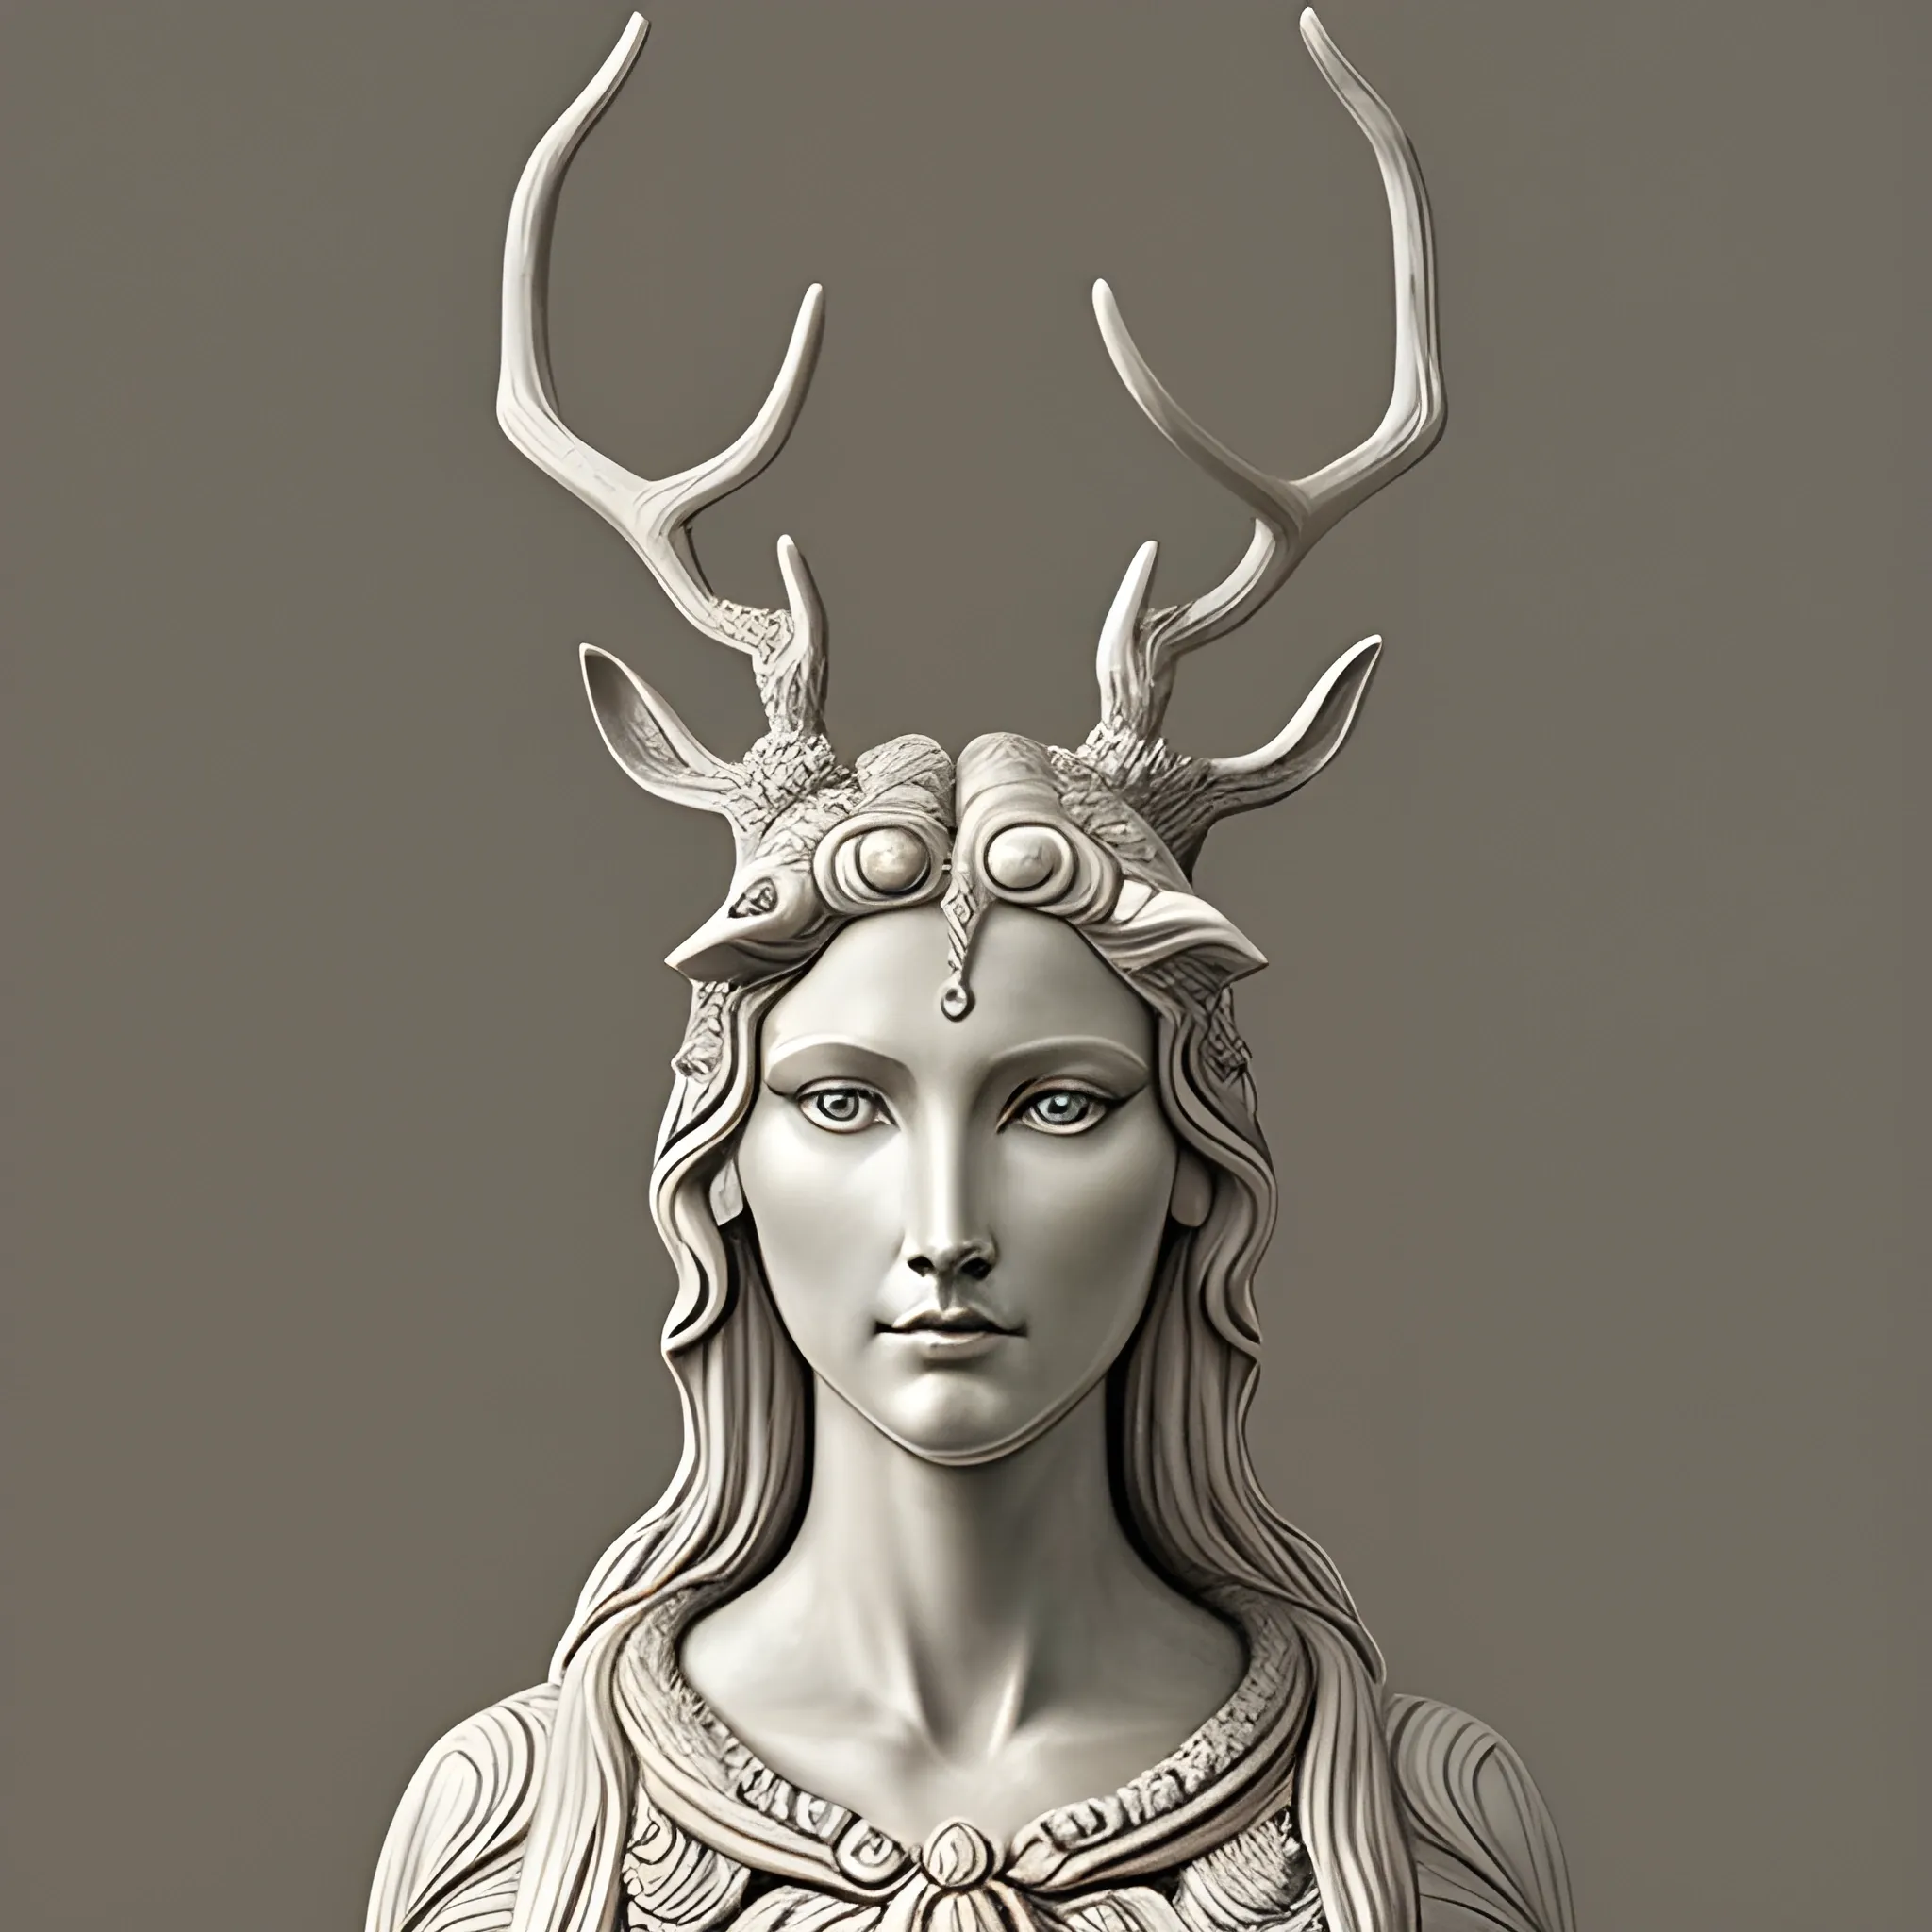 , Pencil Sketch A hyperrealistic and stylized representation of a female goddess of deer and plants, along with a creature that fuses the elegance of the deer with the strength of the horse, created by a prodigious contemporary sculptor of the 21st century